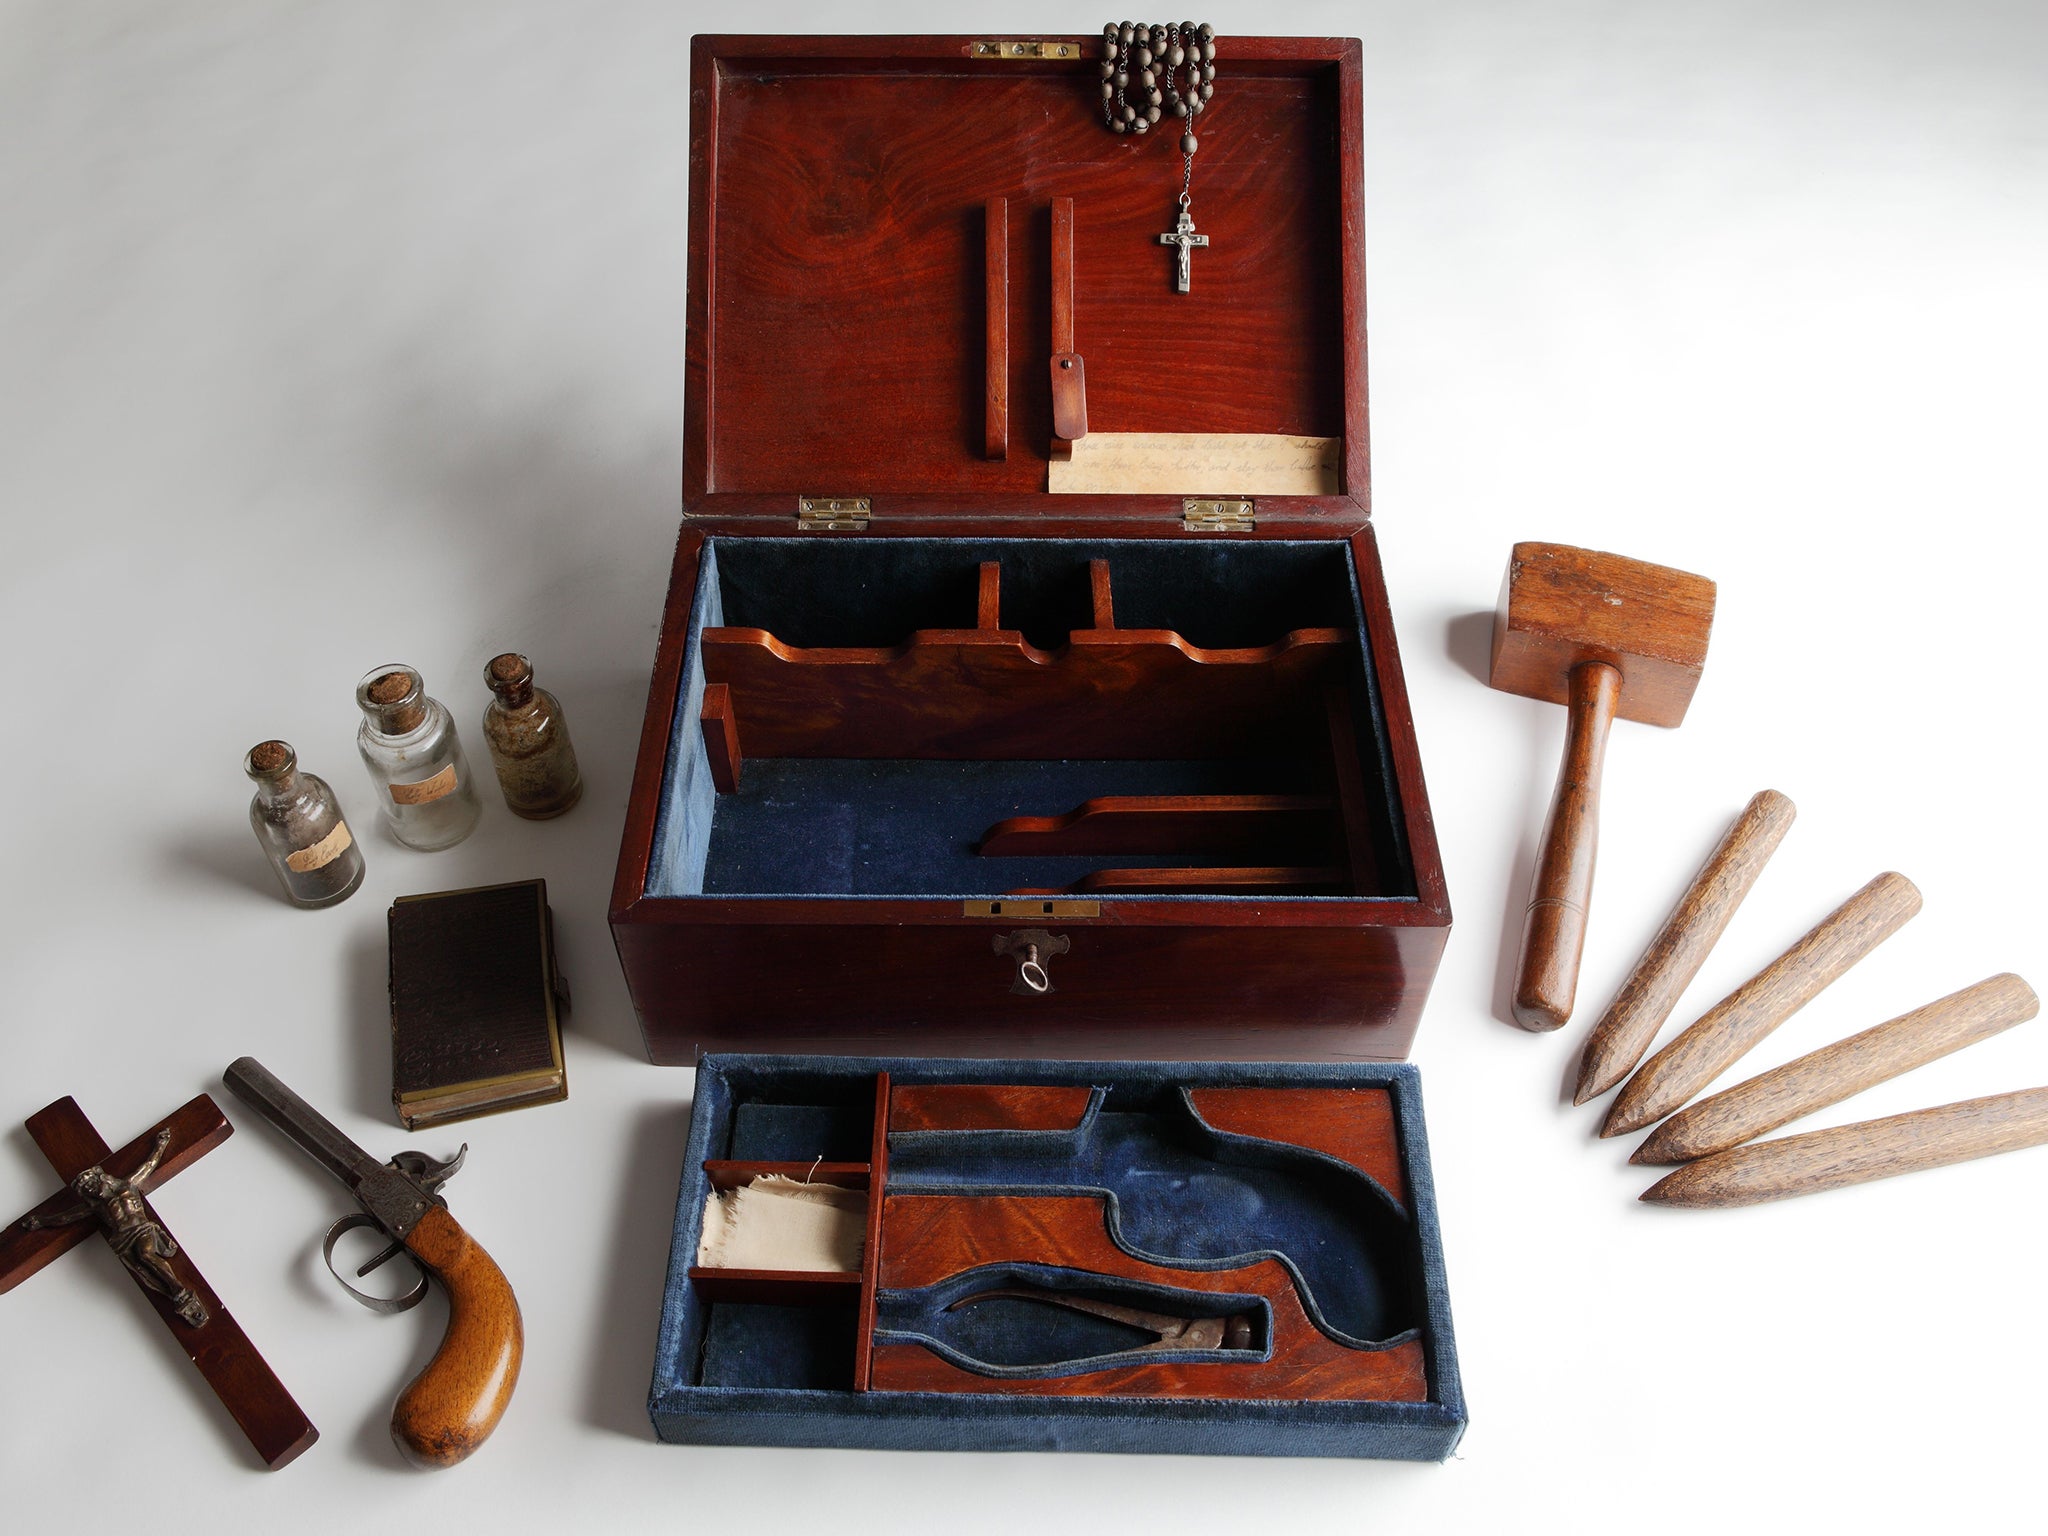 A Victorian vampire slaying kit on display in 'Terror and Wonder: The Gothic Imagination exhibition' at the British Library